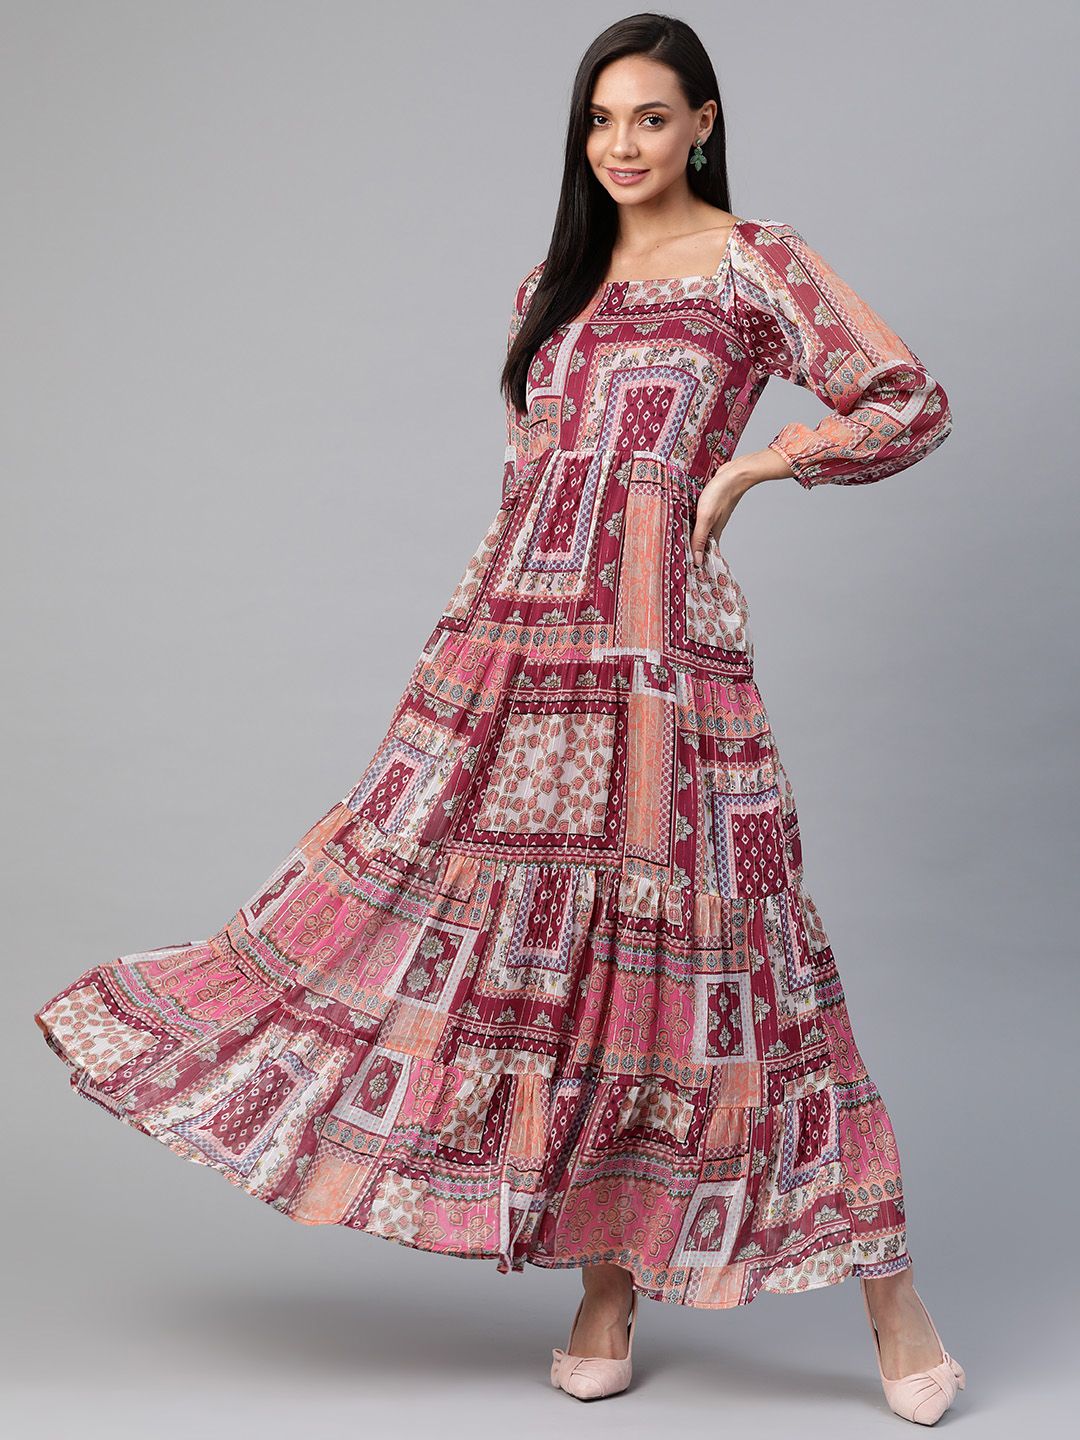 Cottinfab Pink & Peach-Coloured Ethnic Motifs Tiered Maxi Dress Price in India